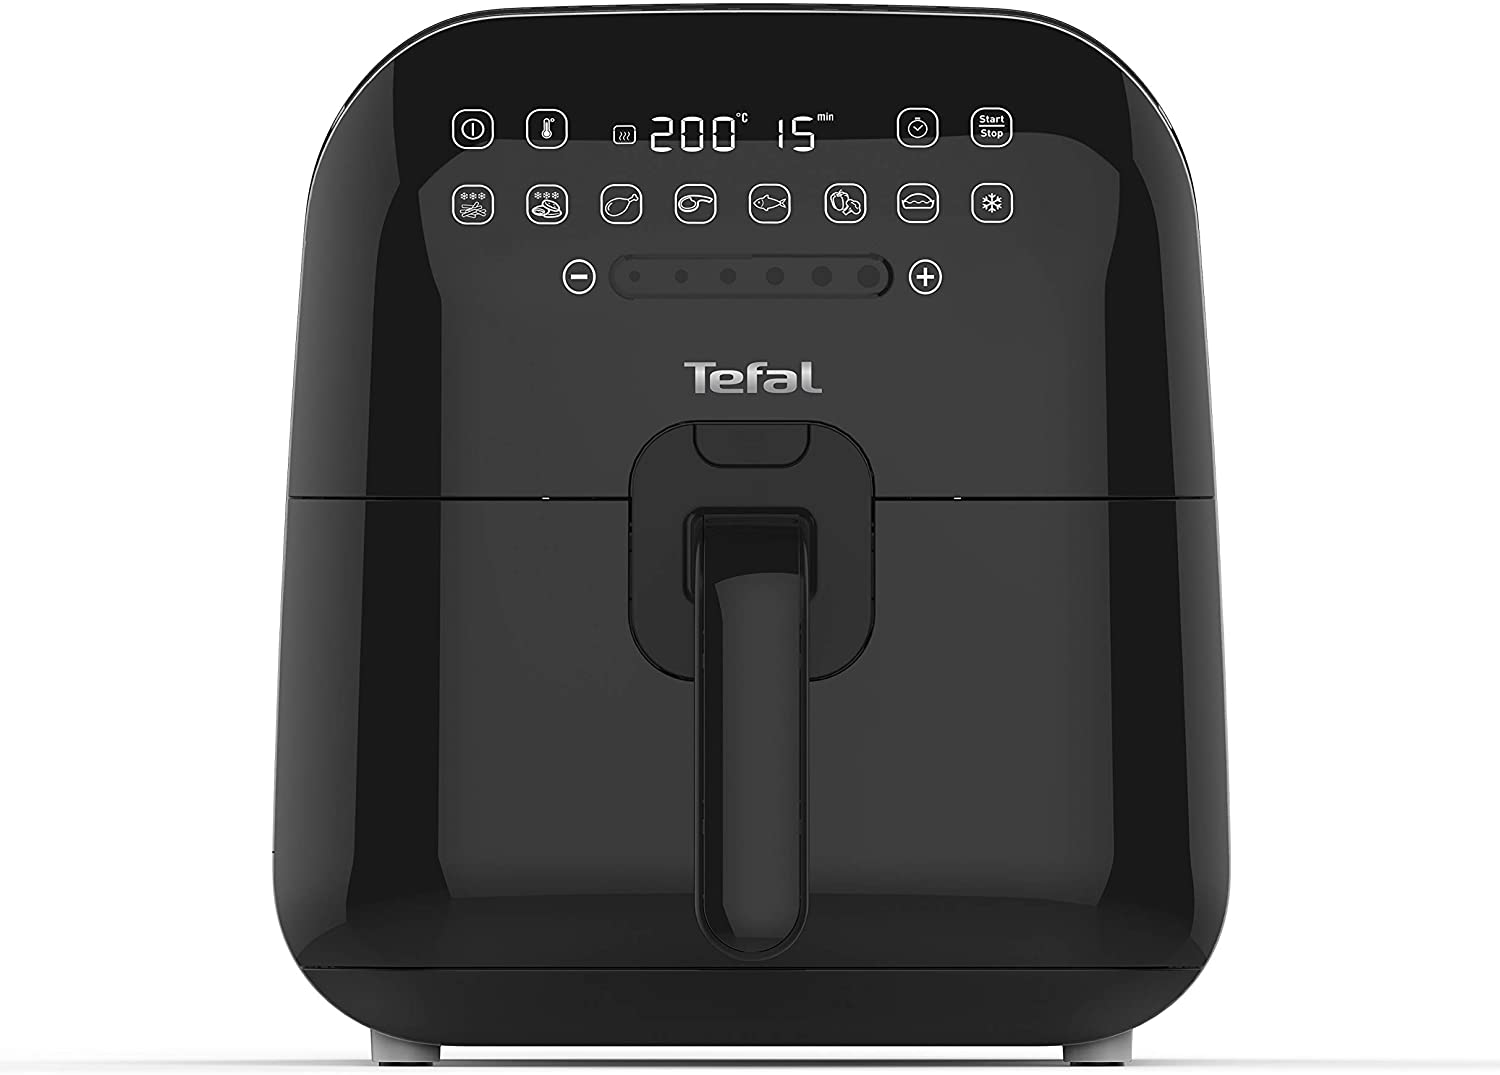 Tefal FX2028 Ultimate Fry Hot Air Fryer Usable Volume 1.2 kg Temperature Setting 60 - 200 °C Touchscreen Black